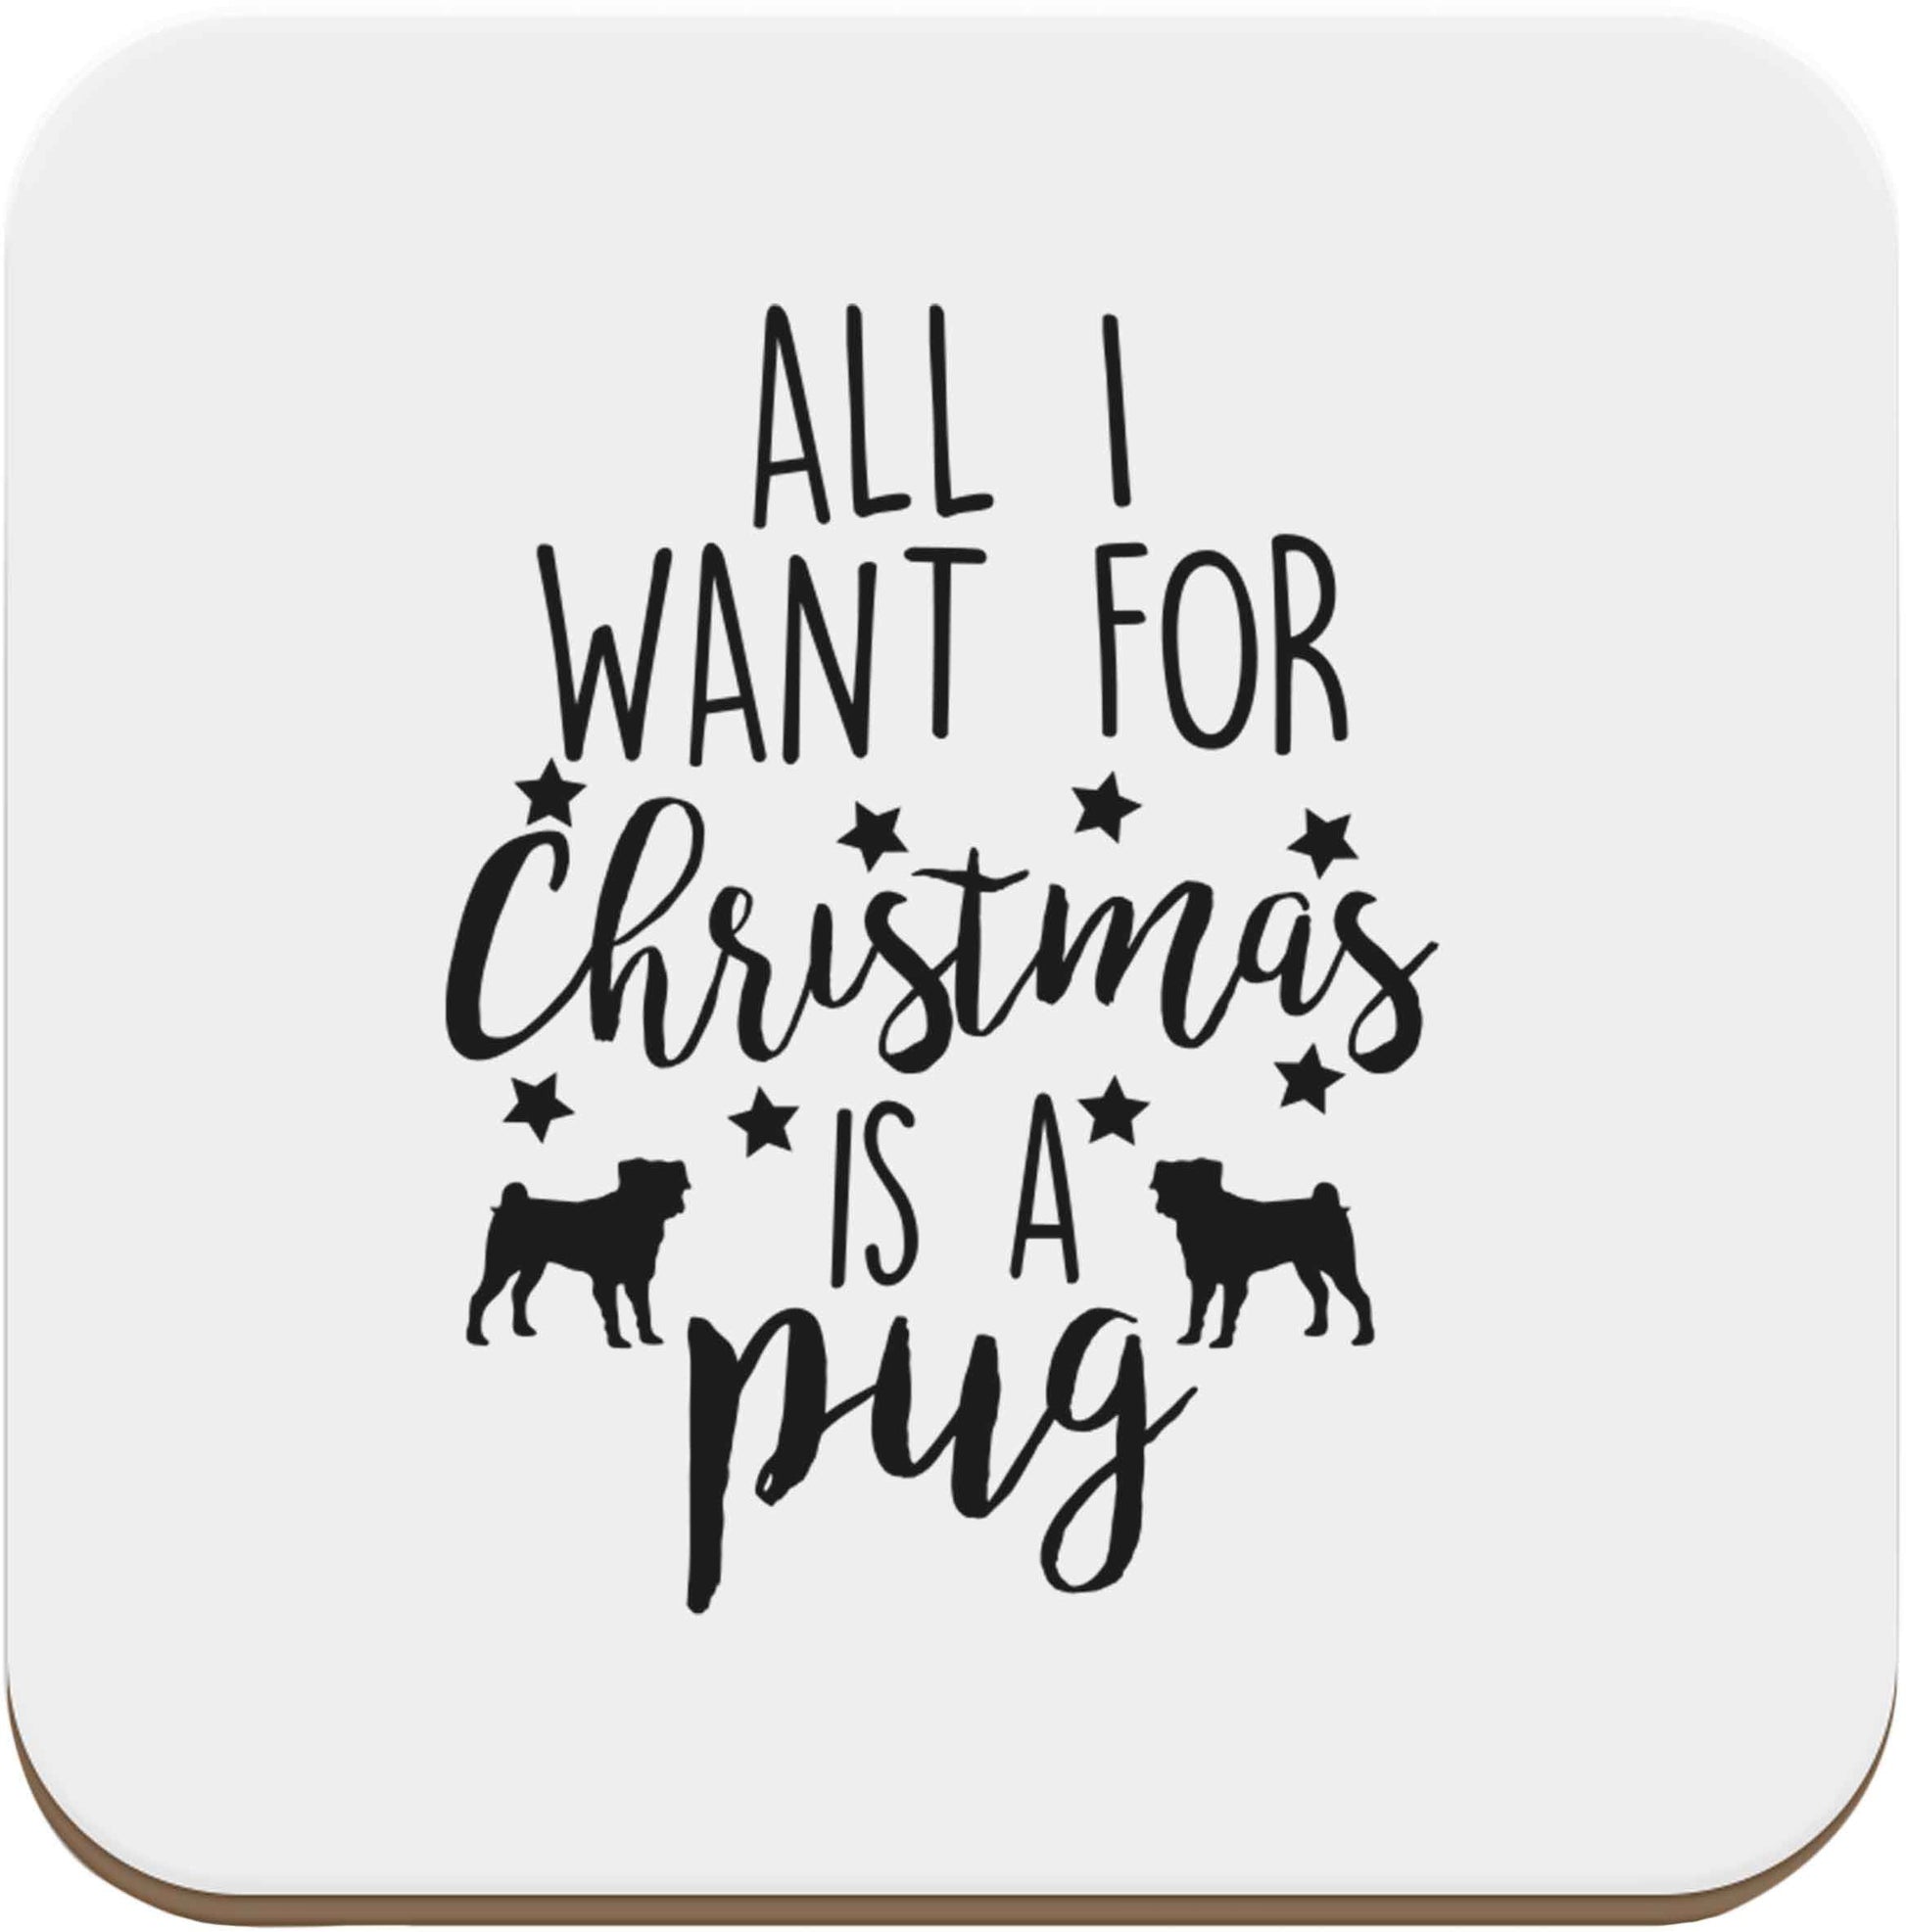 All I want for Christmas is a pug set of four coasters